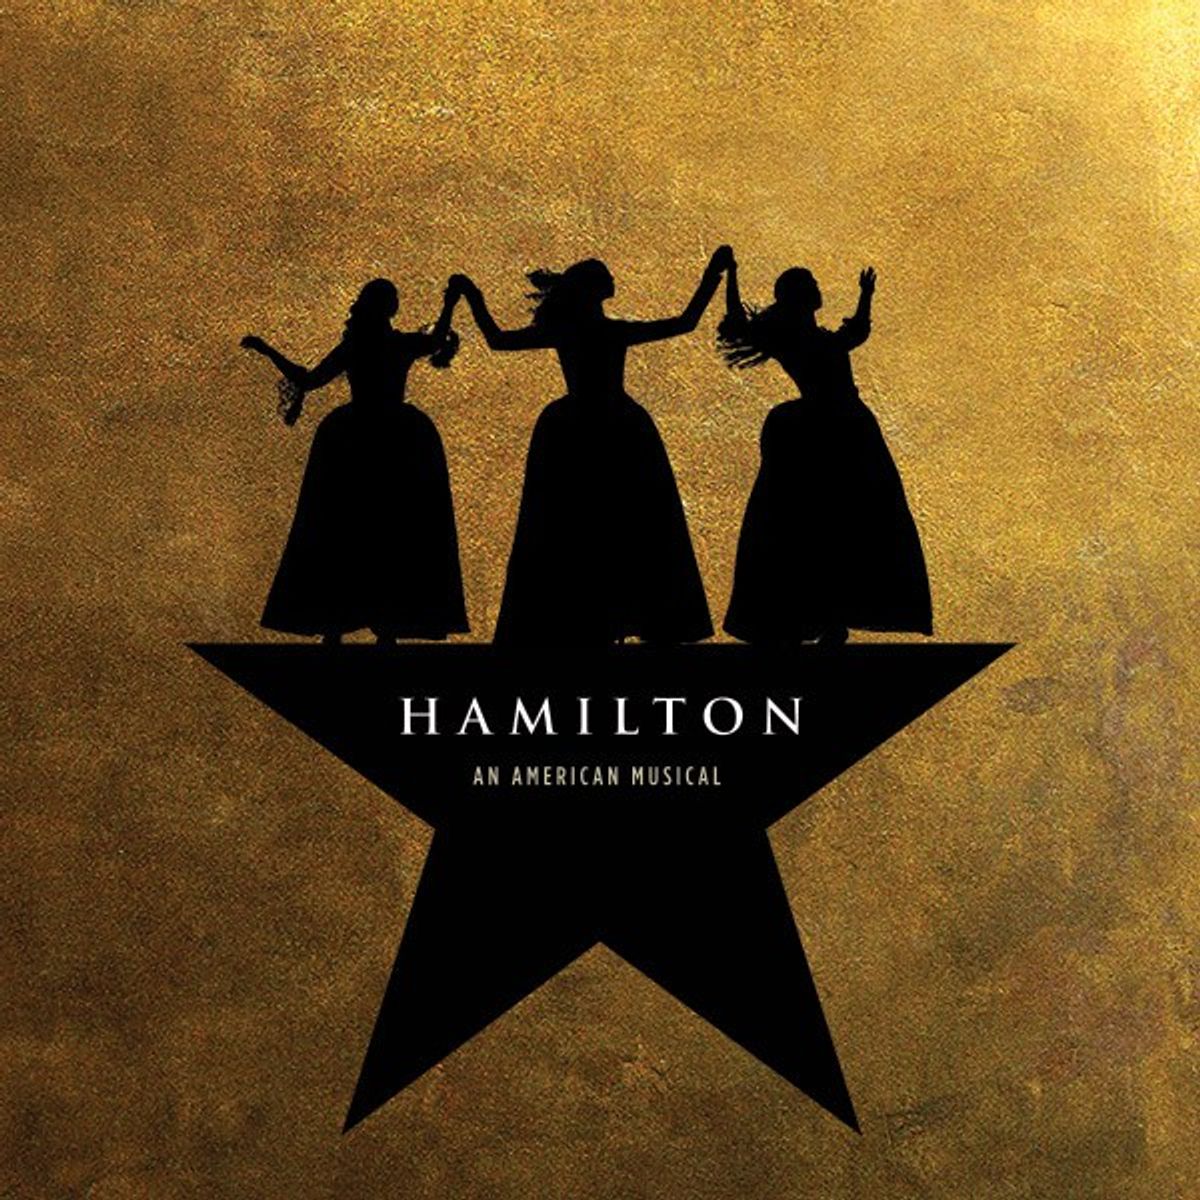 Have You Cried Over Hamilton Yet?